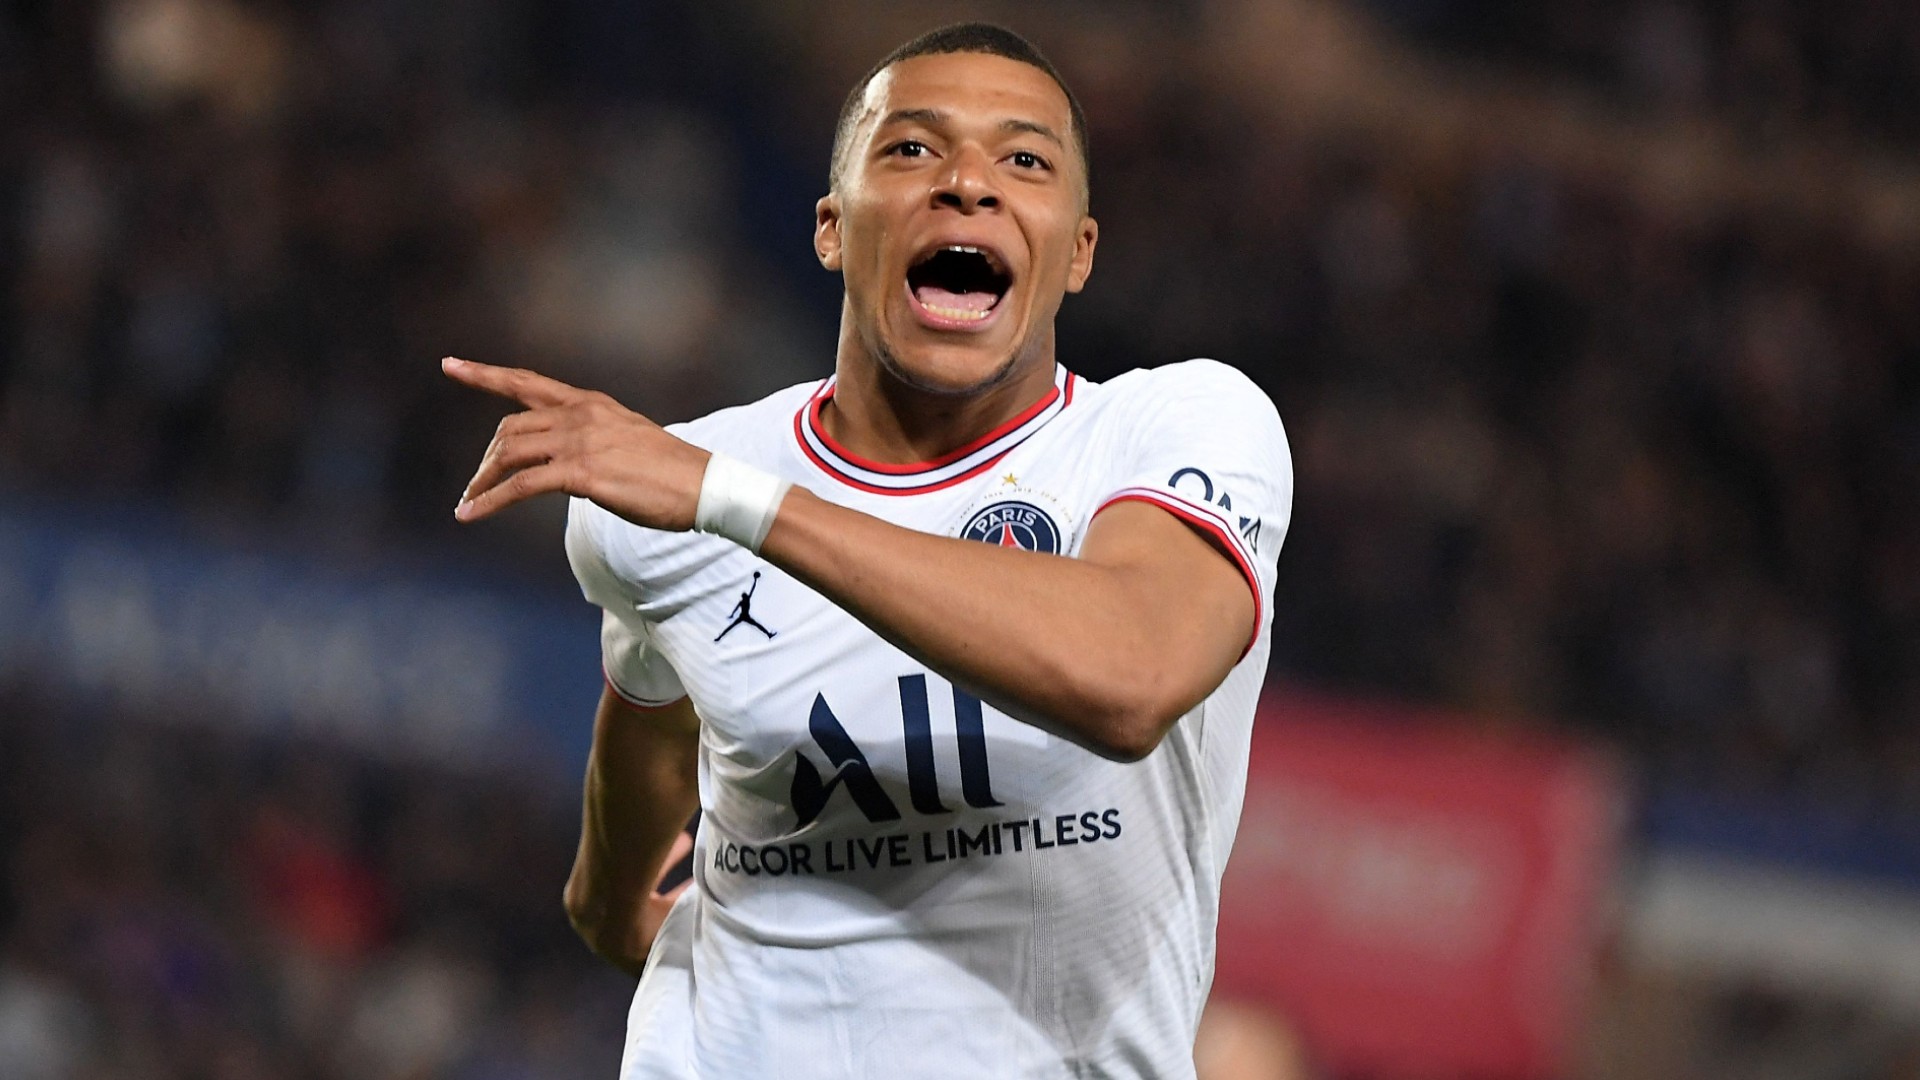 Join Vn88 to learn about Mbappe’s unexpected career